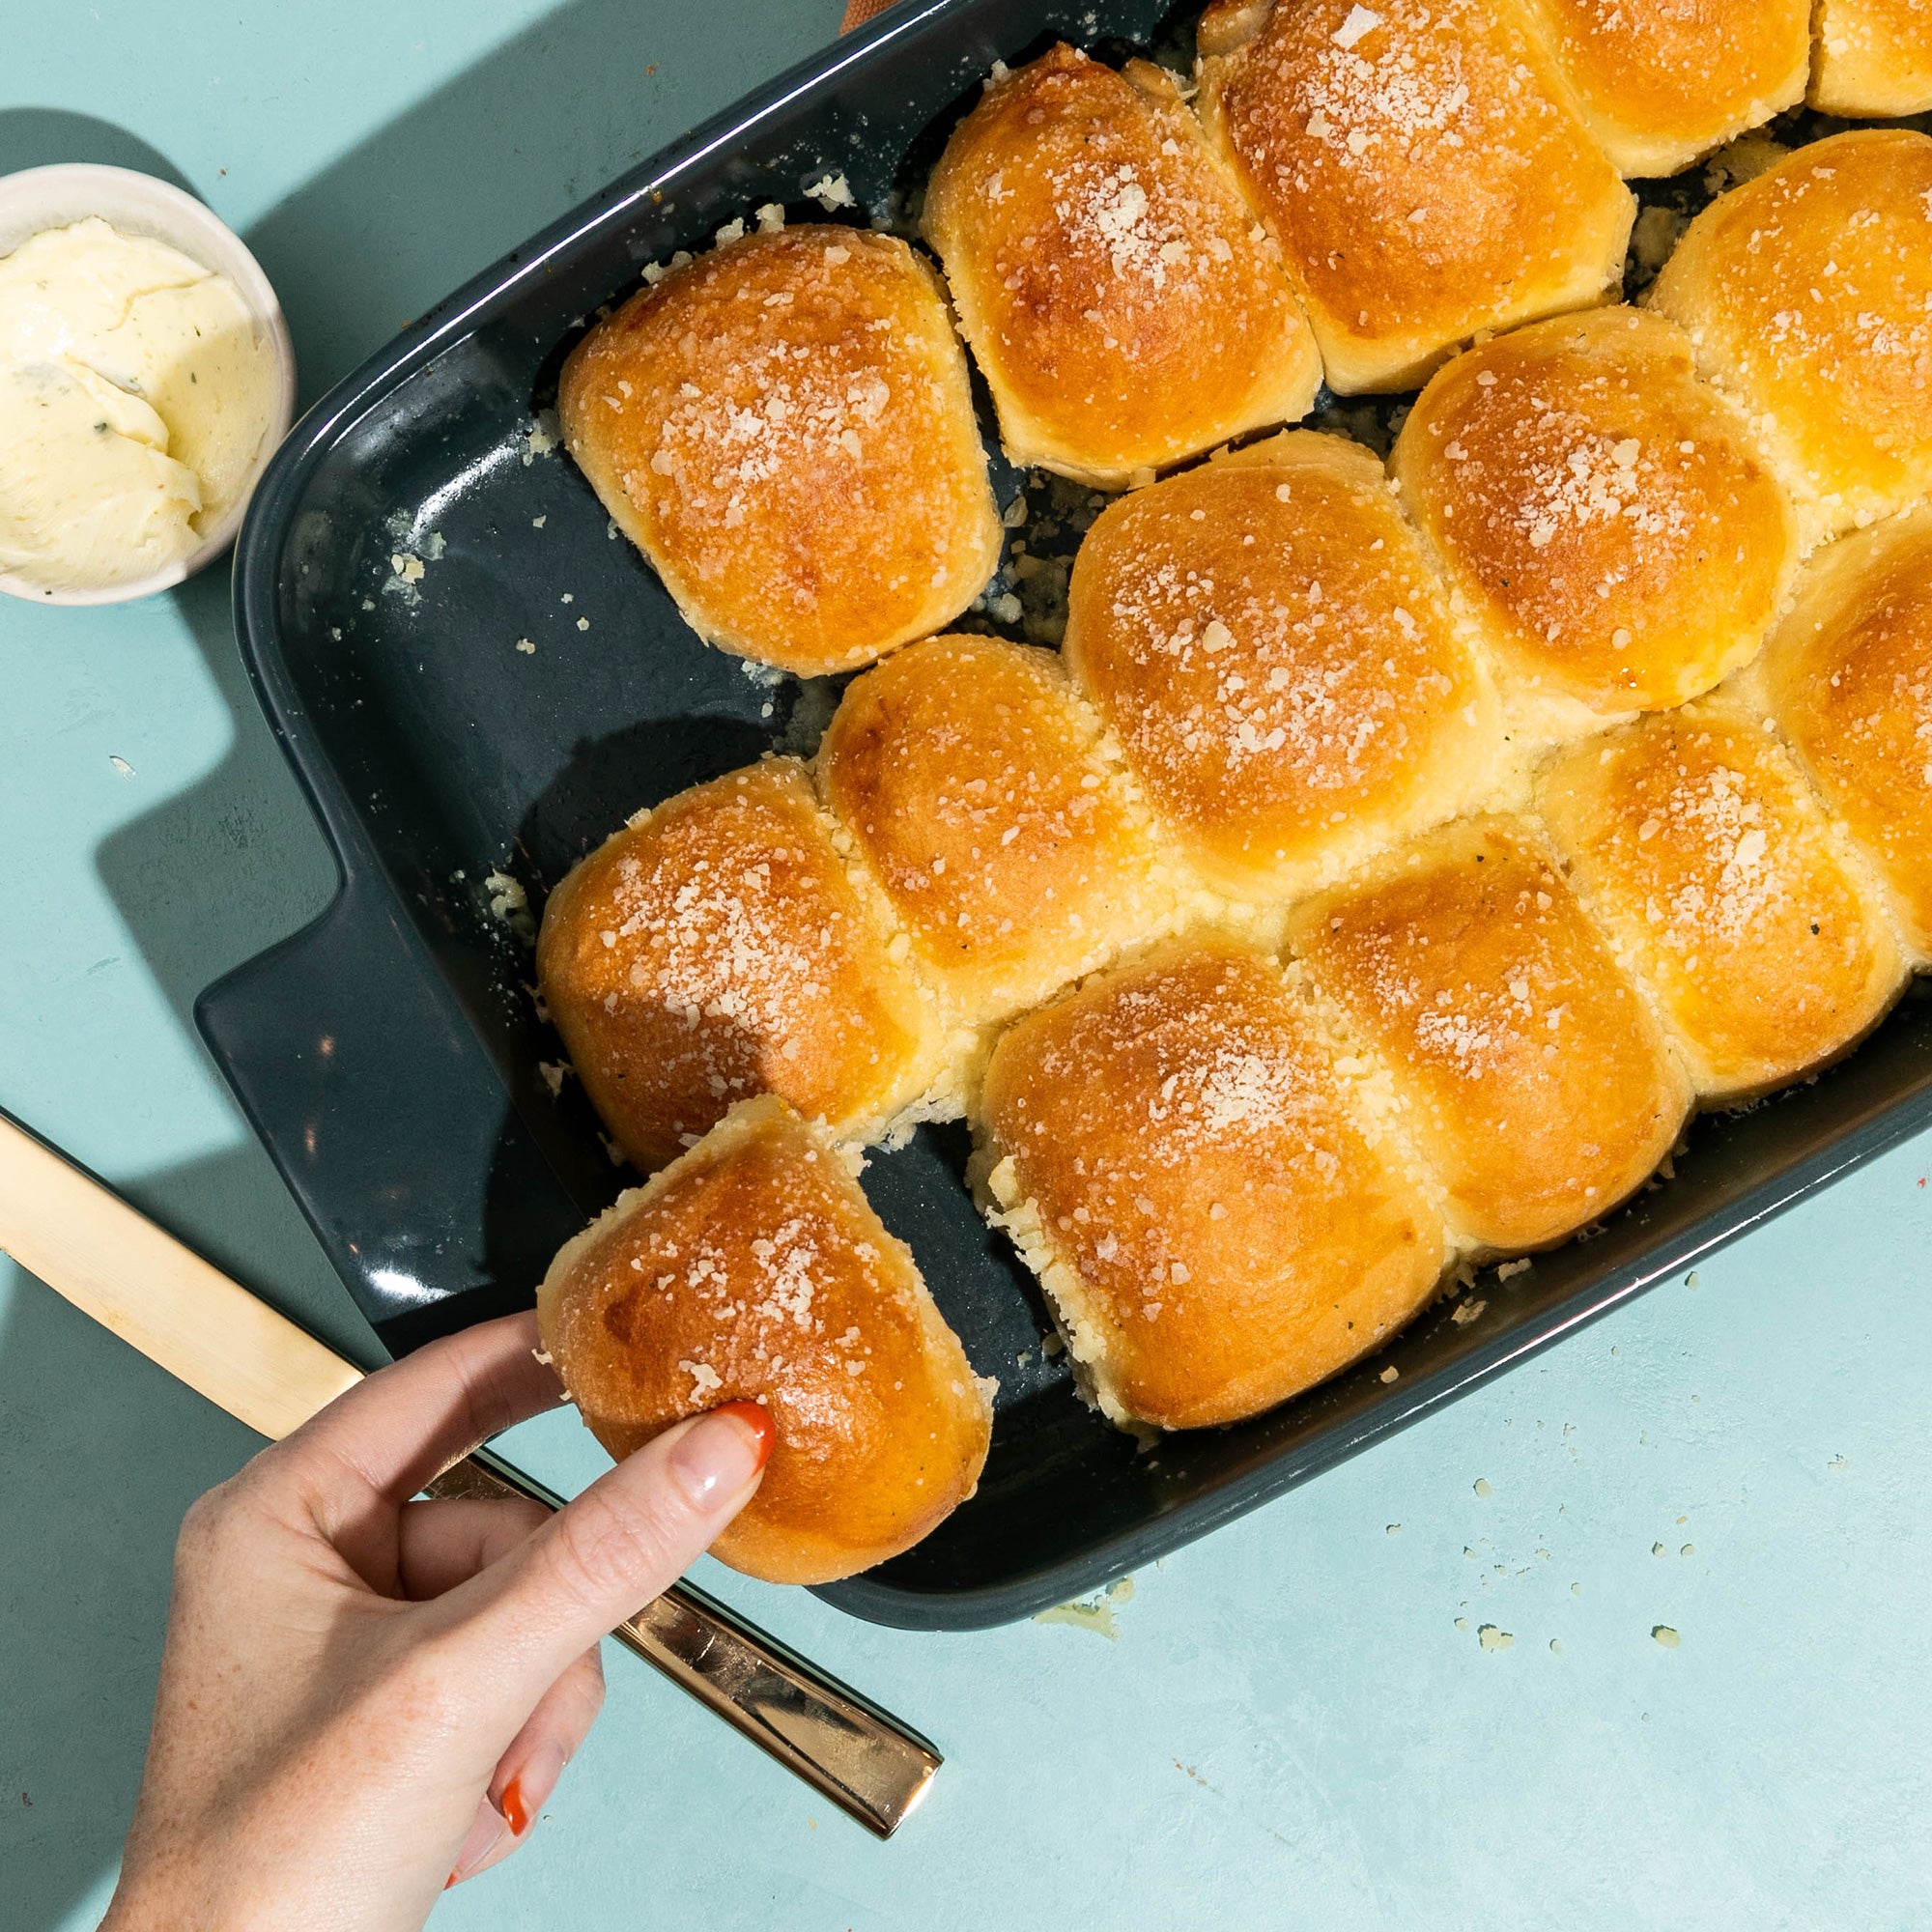 Parm-Dusted Garlic-Butter Pull-Apart Dinner Rolls